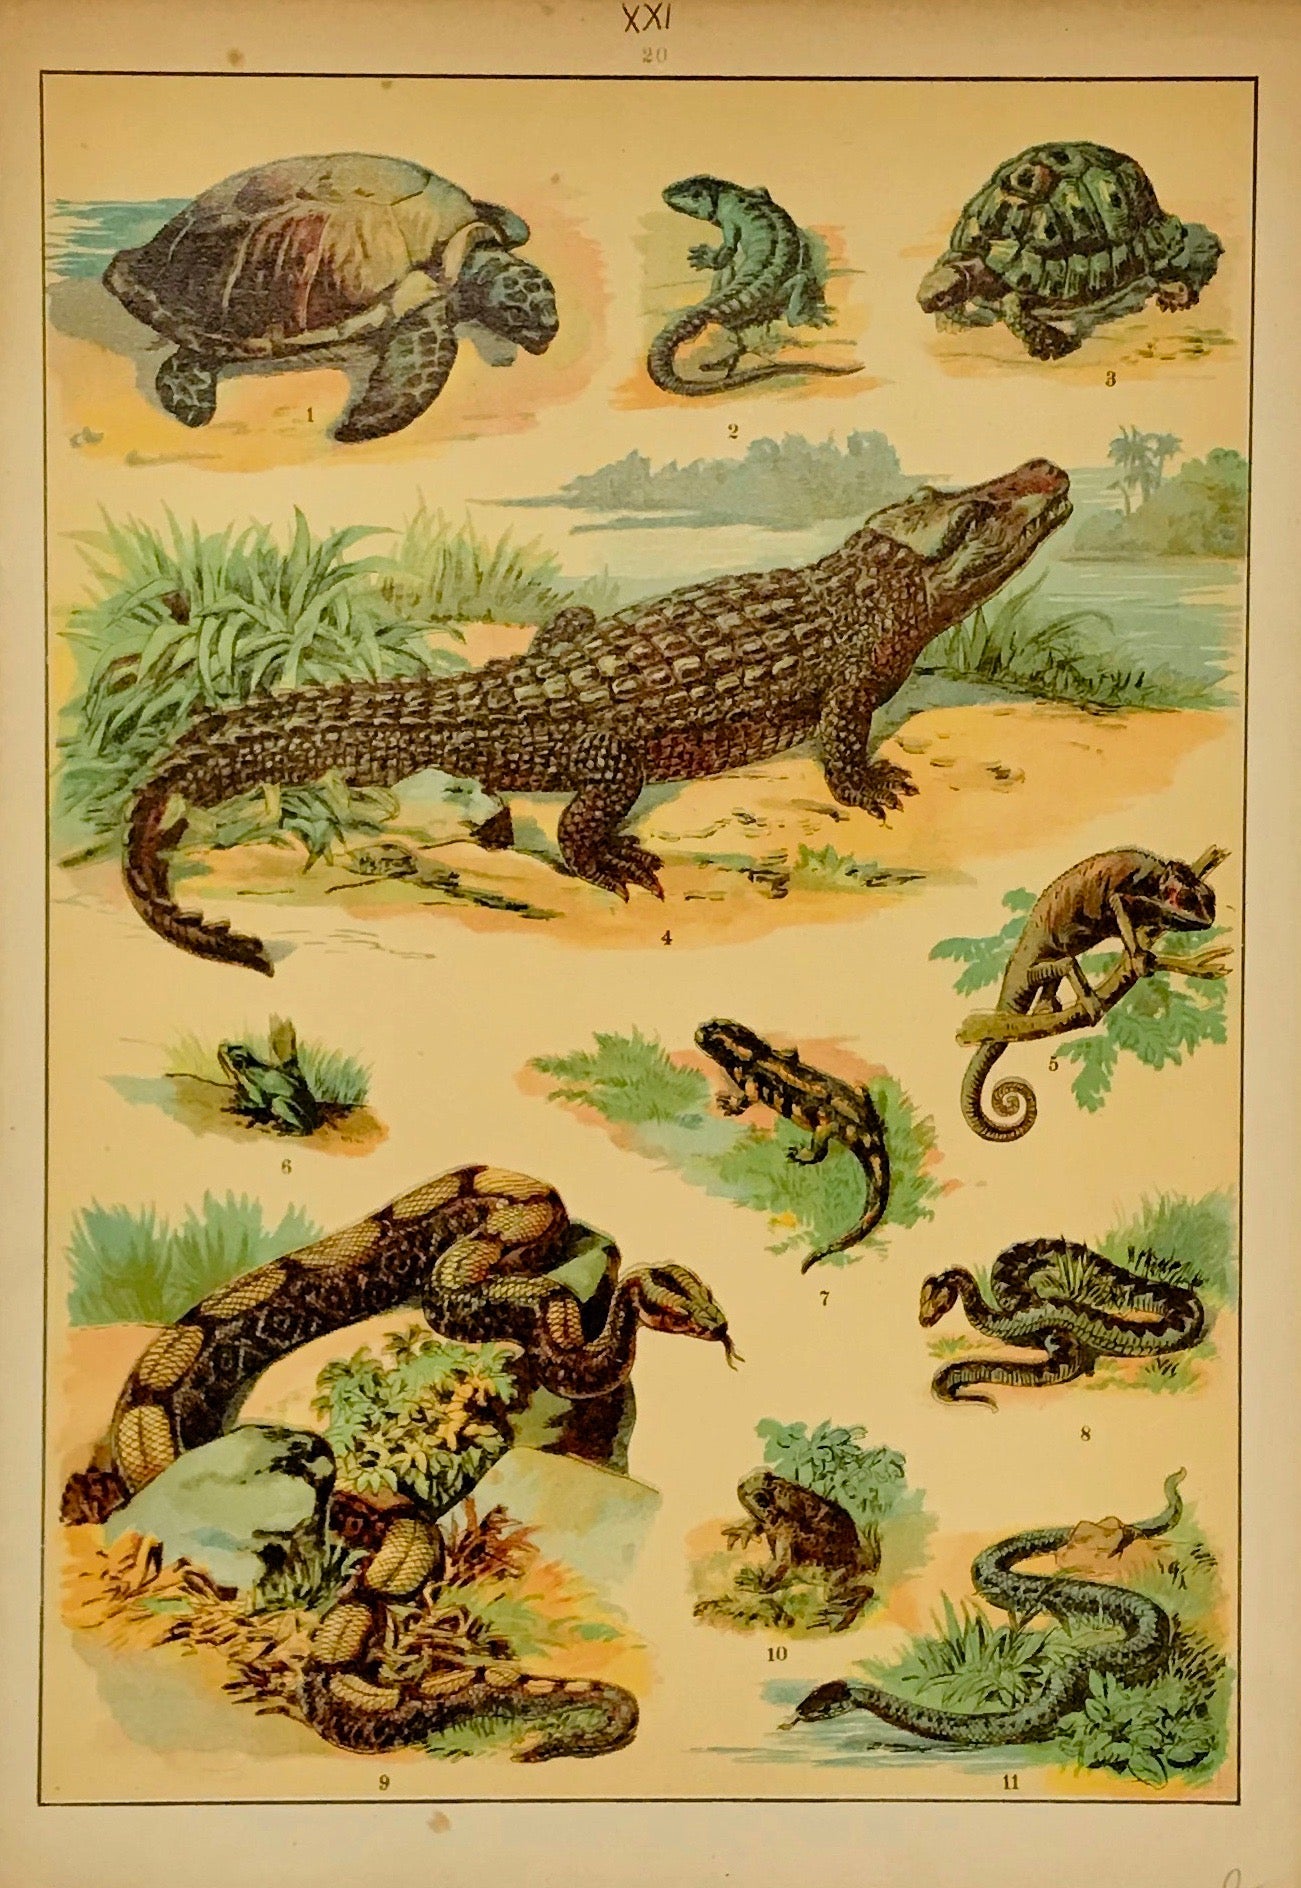 No title  Chromolithograph ca 1900 showing a wide range of reptiles. Light browning on margin edges.